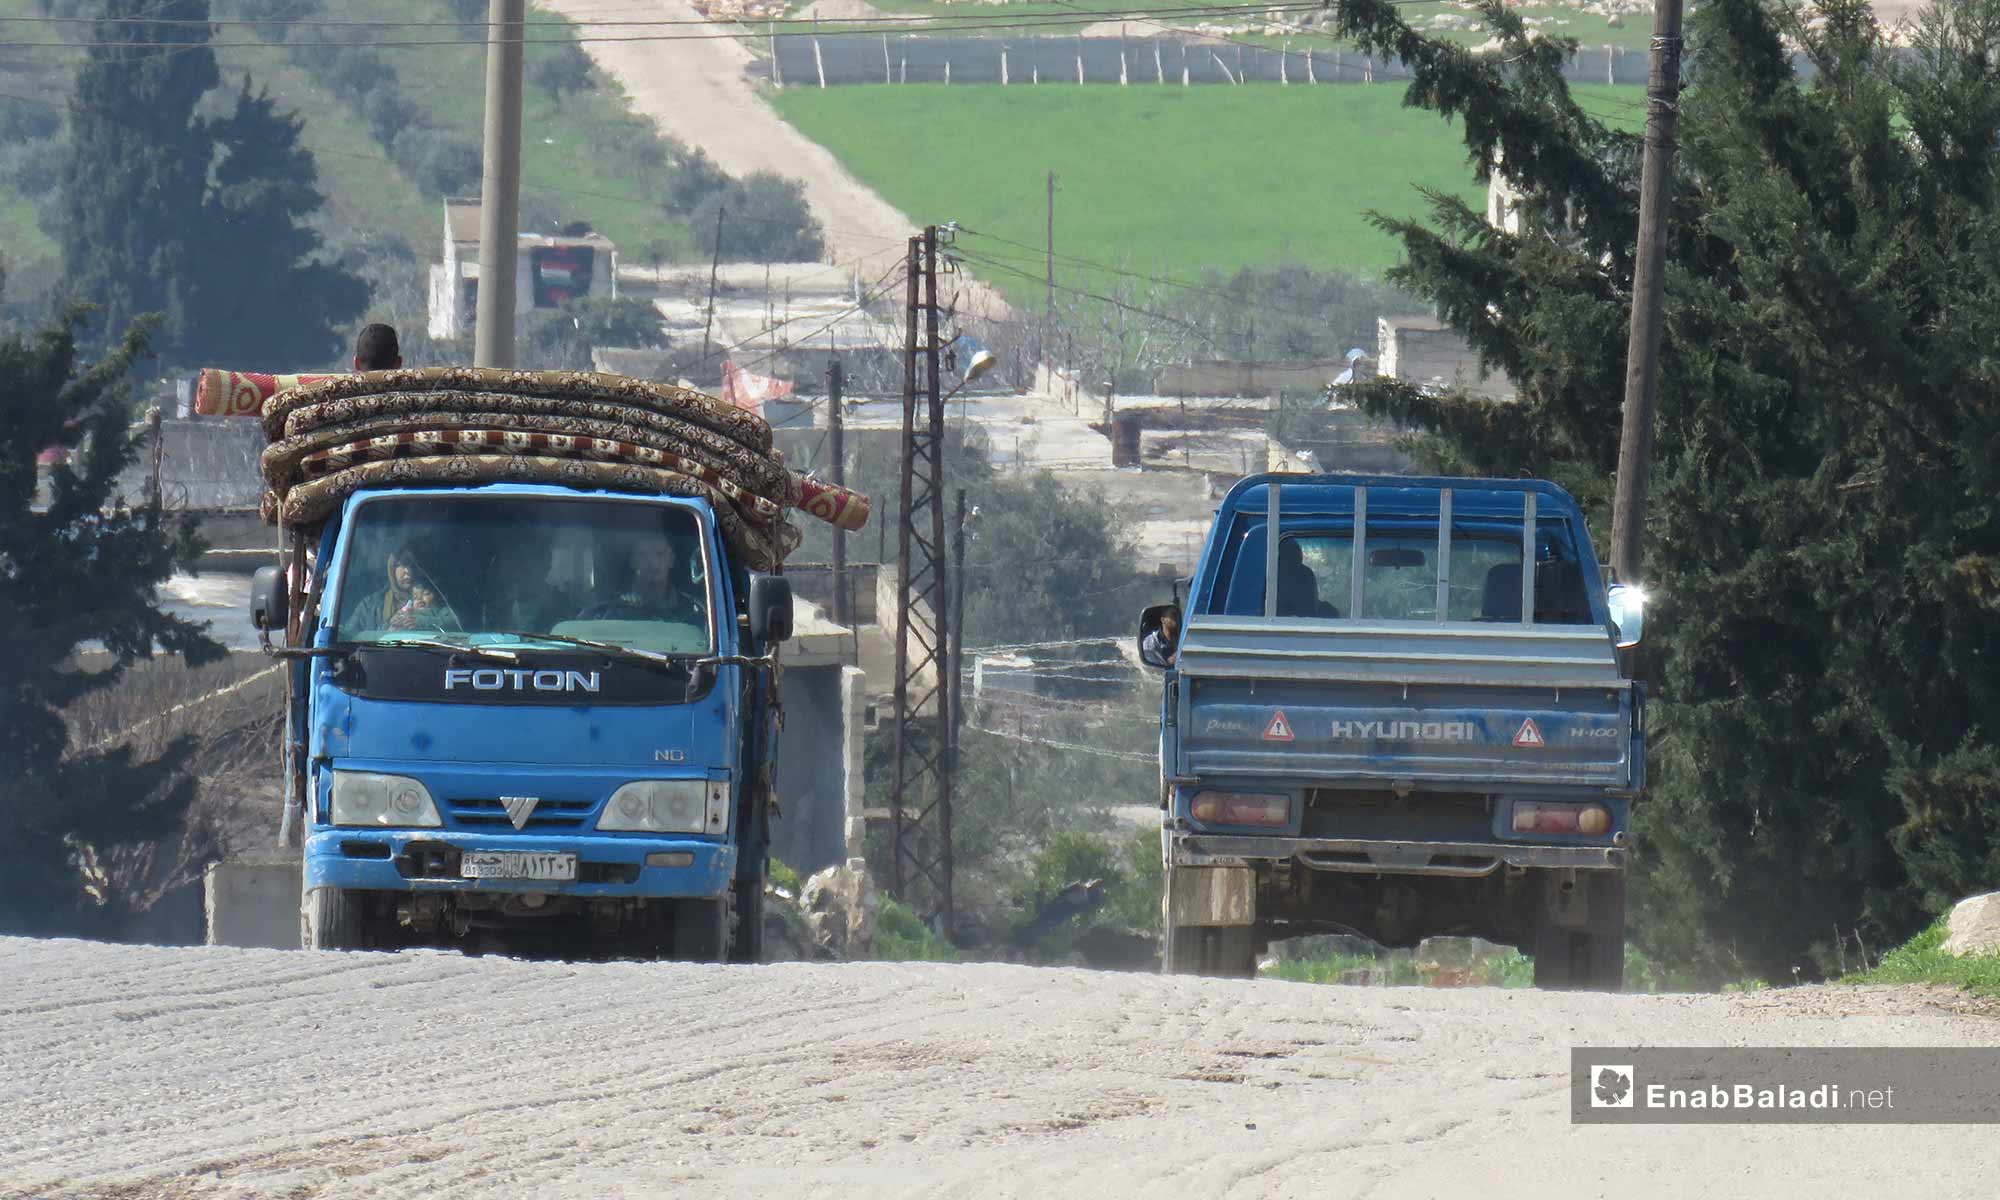 Qalaat al-Madiq’s people are yet being displaced due to constant shelling in rural Hama – February 18, 2019 (Enab Baladi)